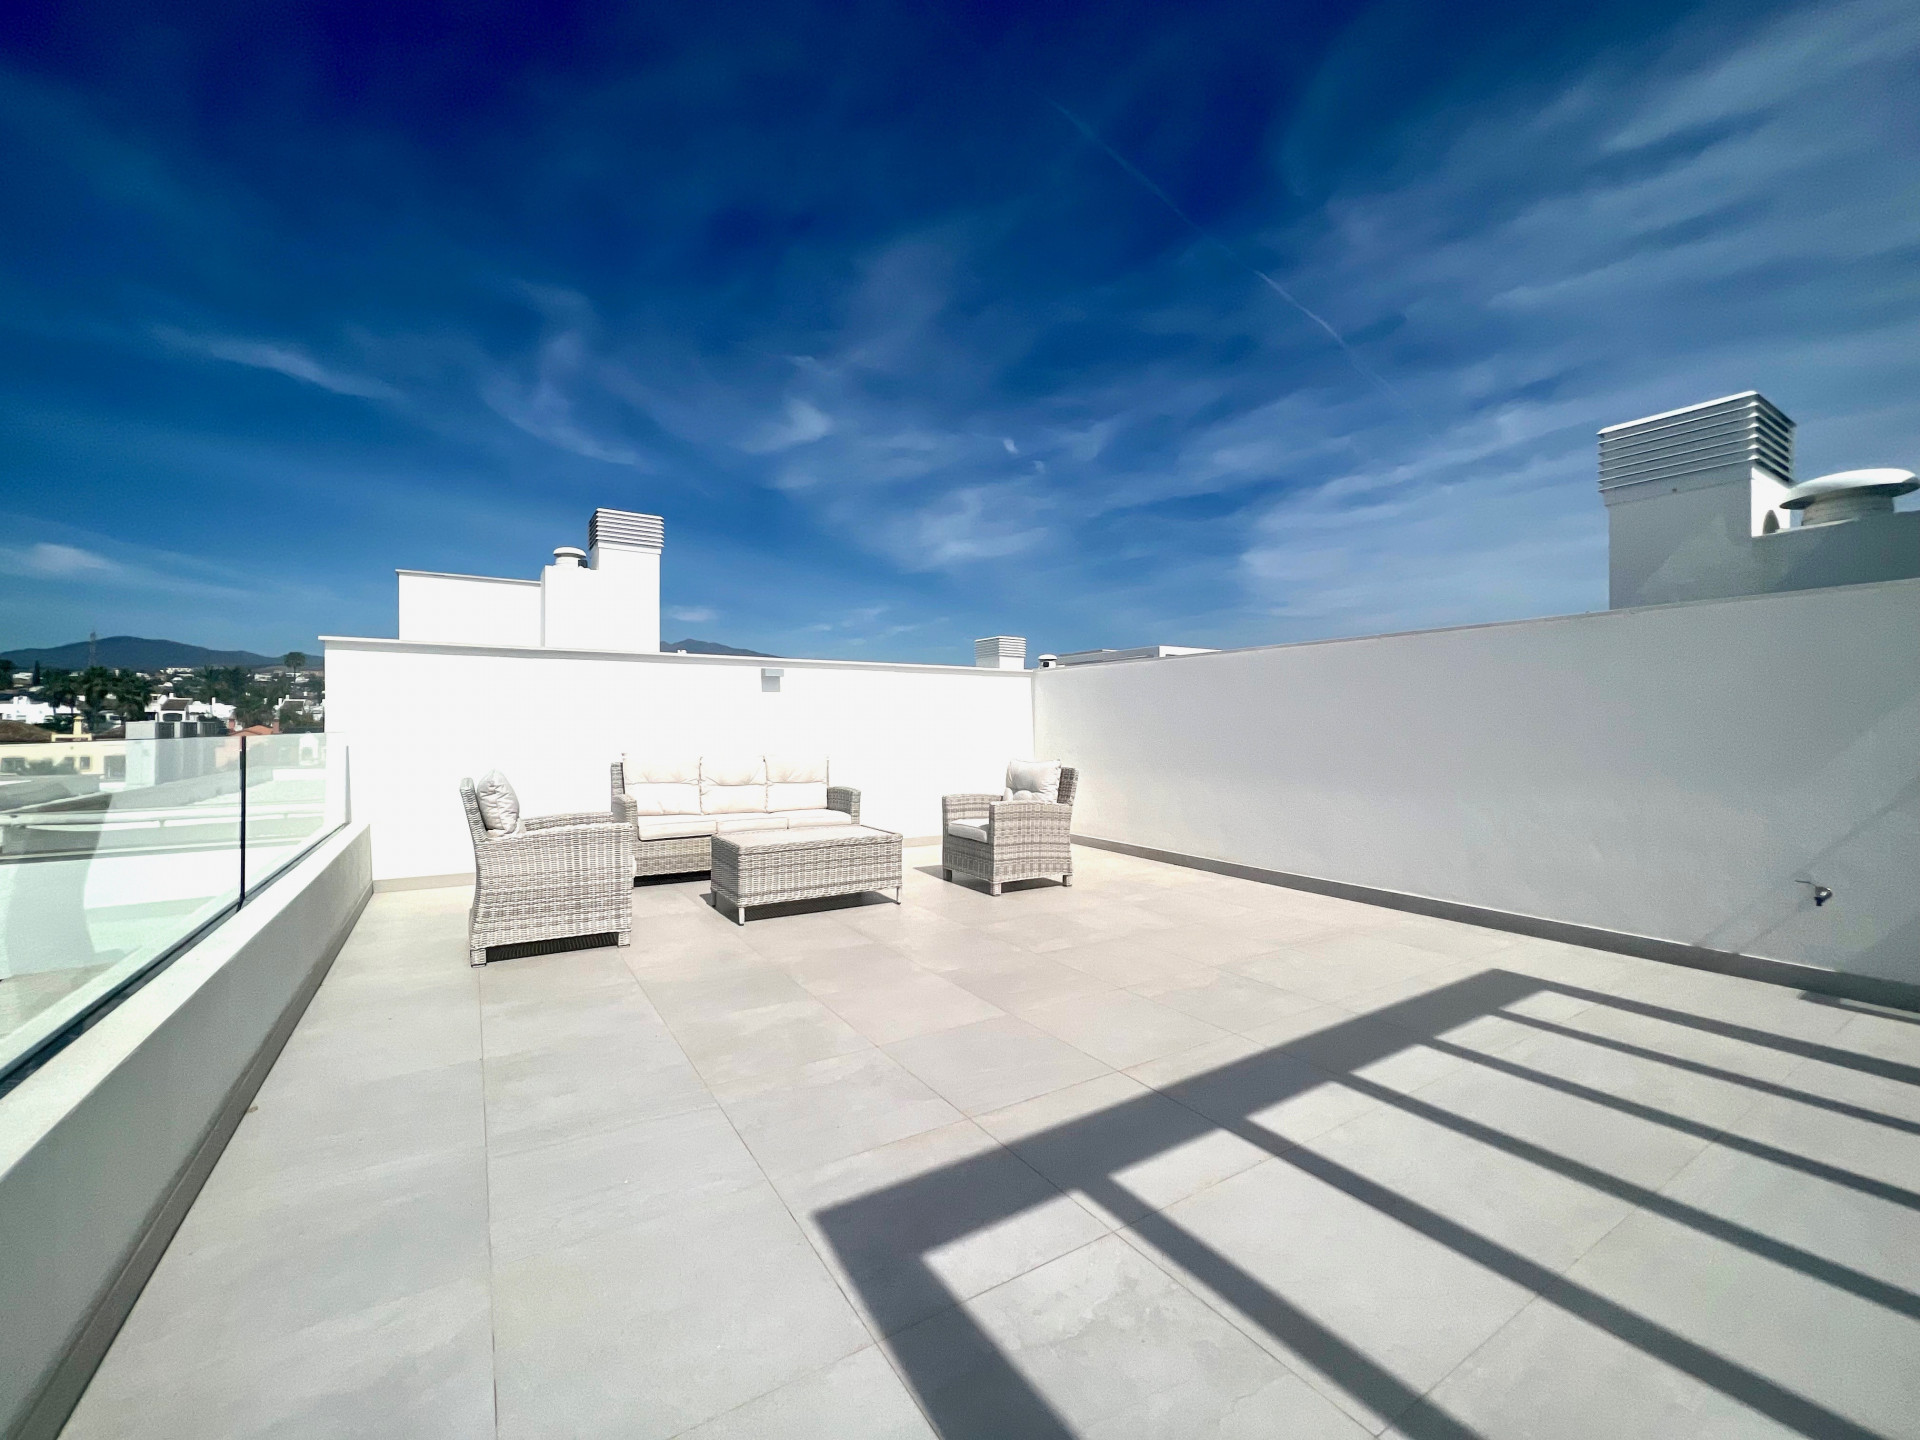 Large 4 bed, 3 bath penthouse with huge roof terrace in Bel Air